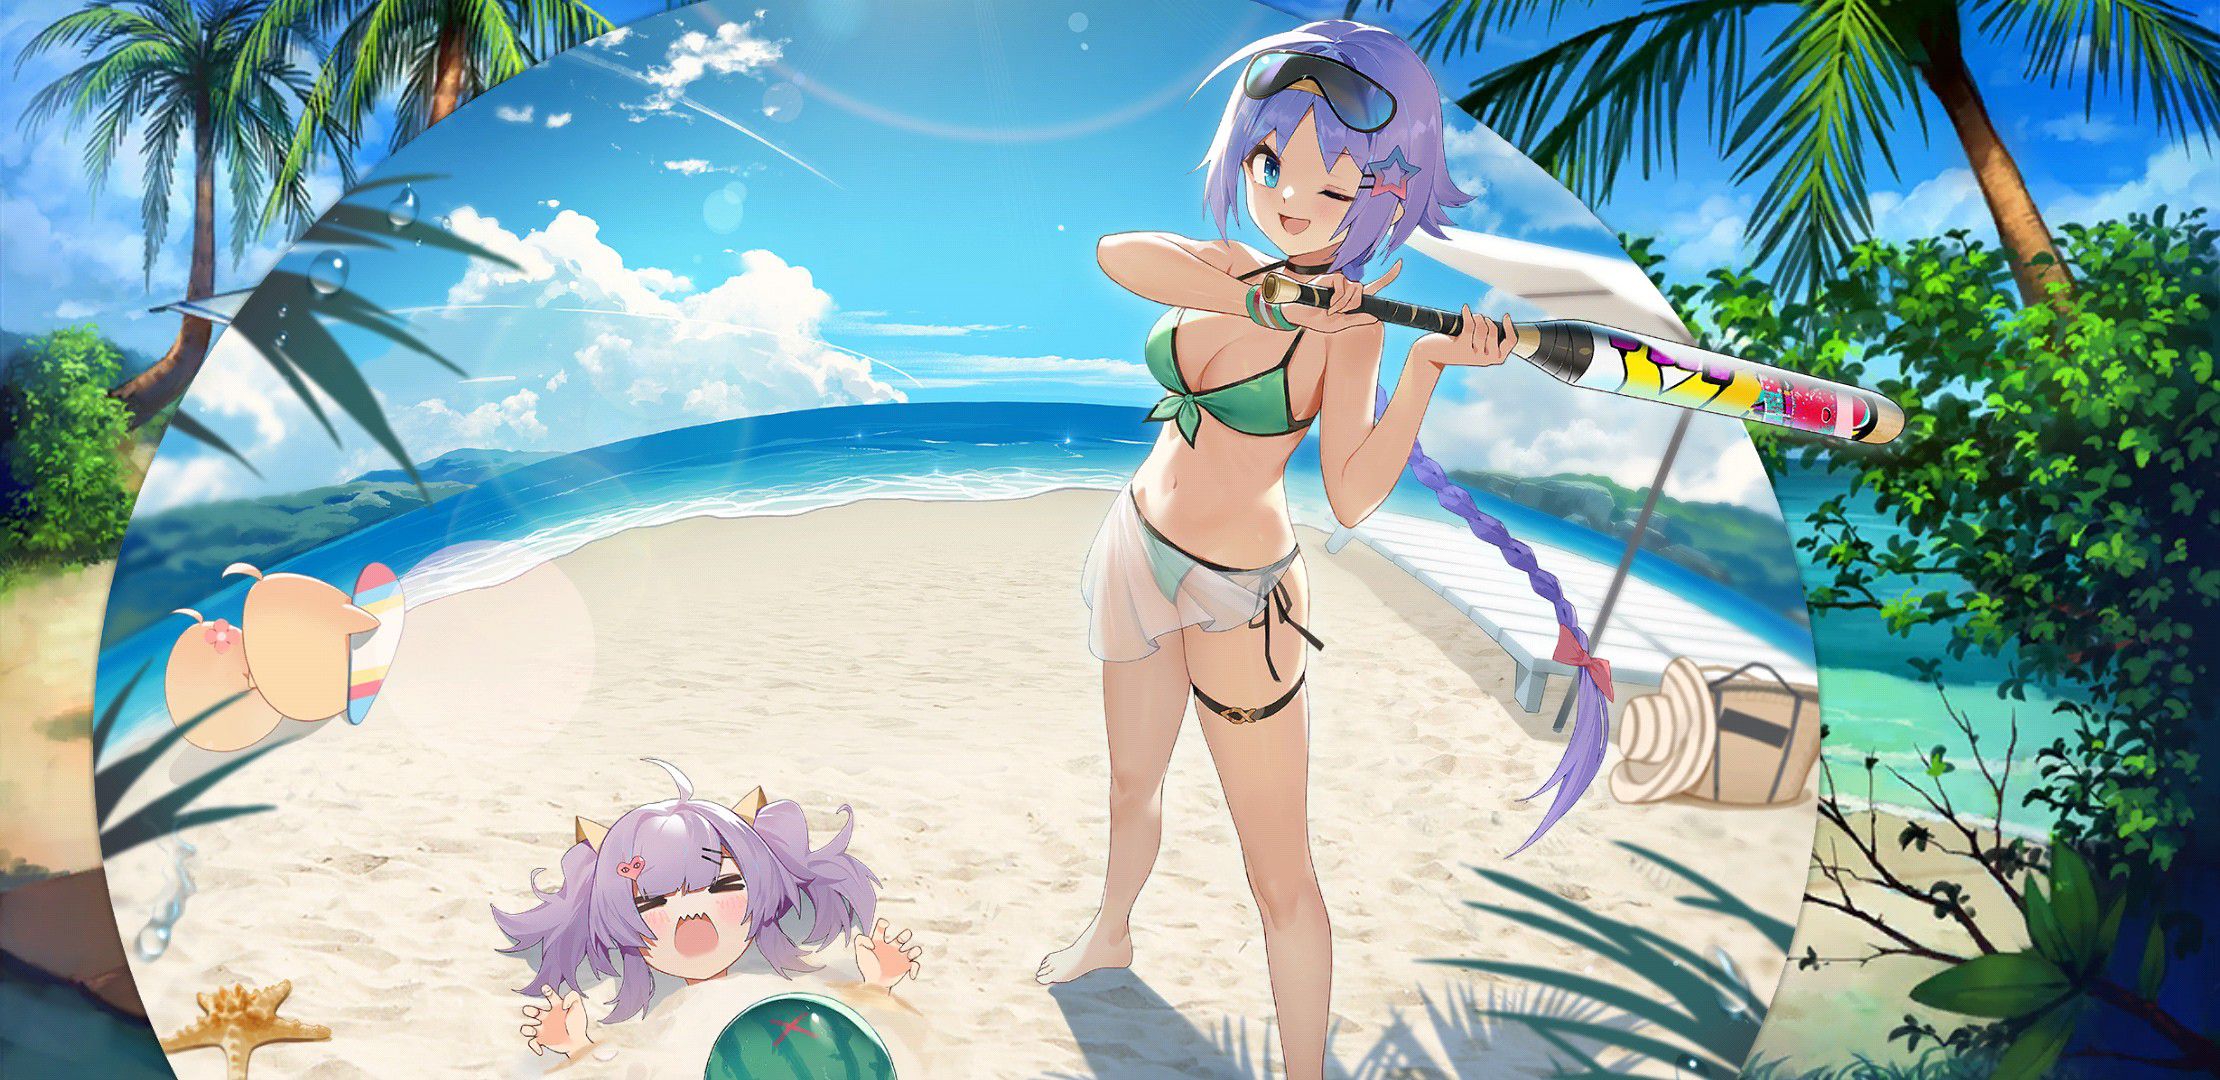 【There is an image】 Smartphone that urges charging with erotic swimsuits is malicious 25